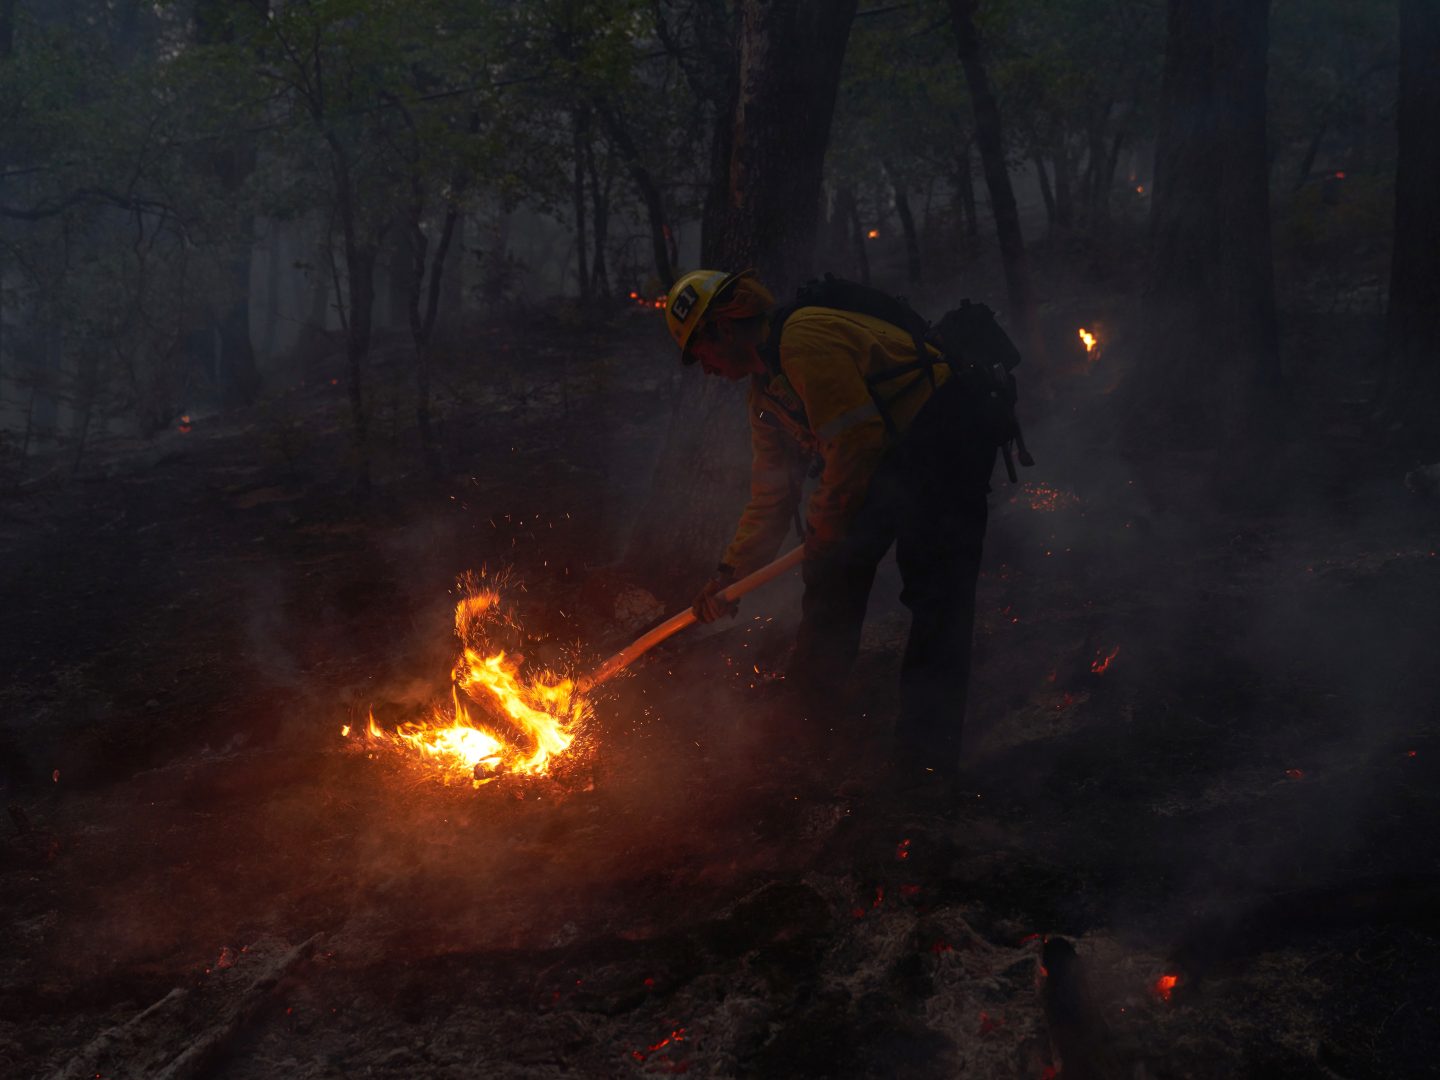 GENESEE, CA - AUGUST 21: A wildfire hot shot crew battles flames as the Dixie Fire pushes through the Genesee Valley on August 21, 2021 in Genesee, California. The Dixie Fire, Californias second largest wildfire in history, has grown to over 700,000 acres. (Photo by Allison Dinner/Getty Images)